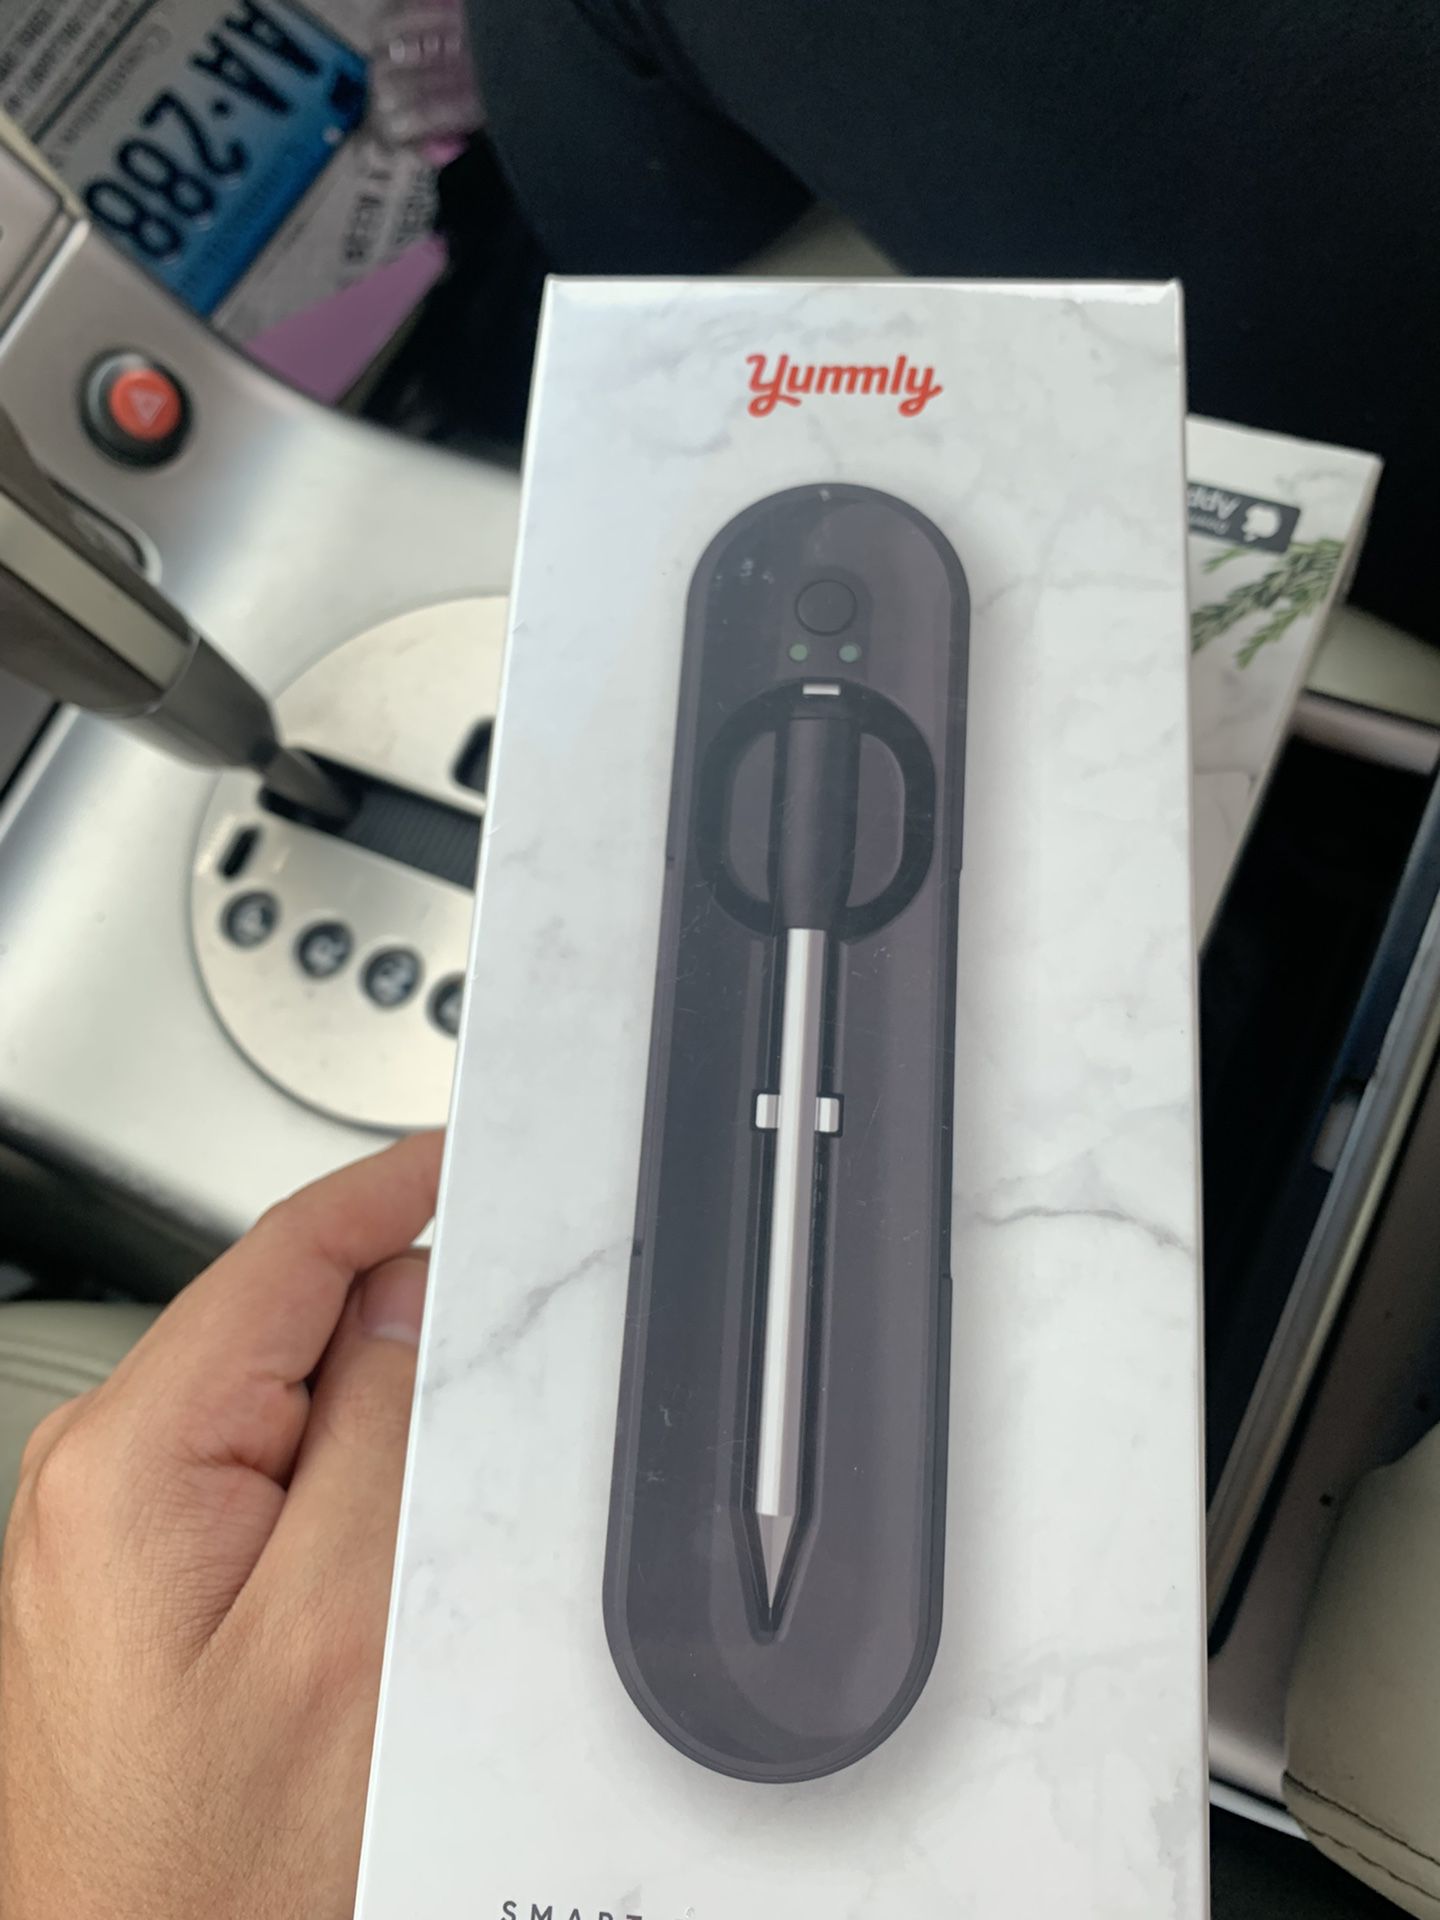 Yummly Smart Thermometer for Sale in Marina Del Rey, CA - OfferUp